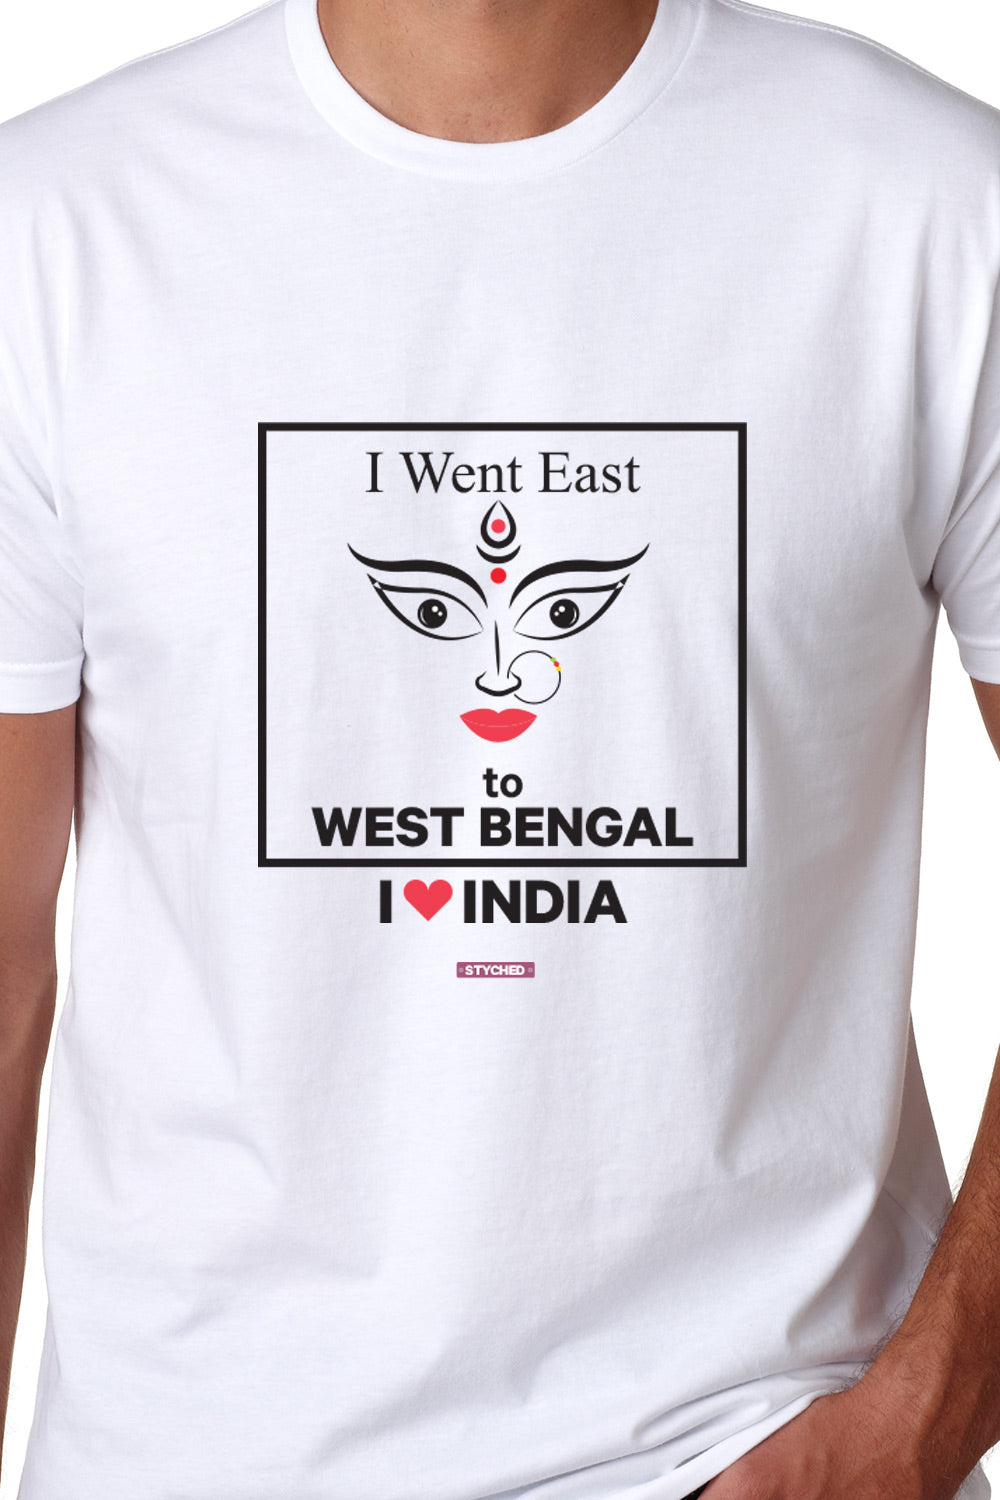 I love West Bengal - Styched in India Graphic T-Shirt White Color